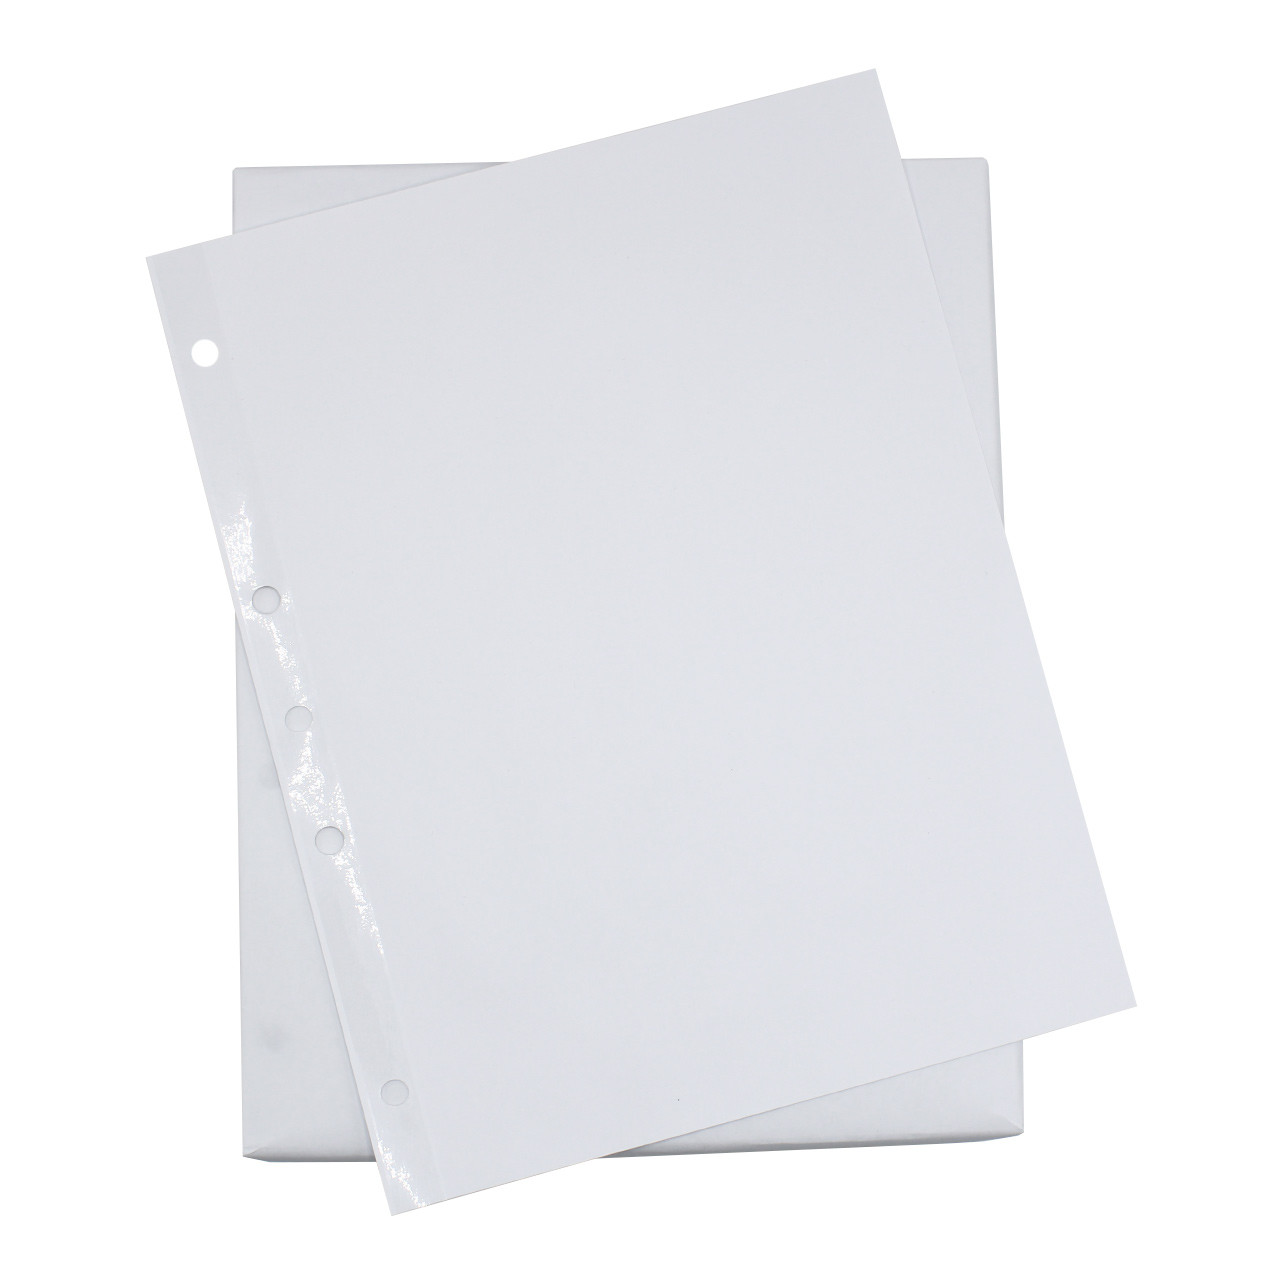  EXCEART 16 Sheets Tag Binder Paper Hole Stickers Hole